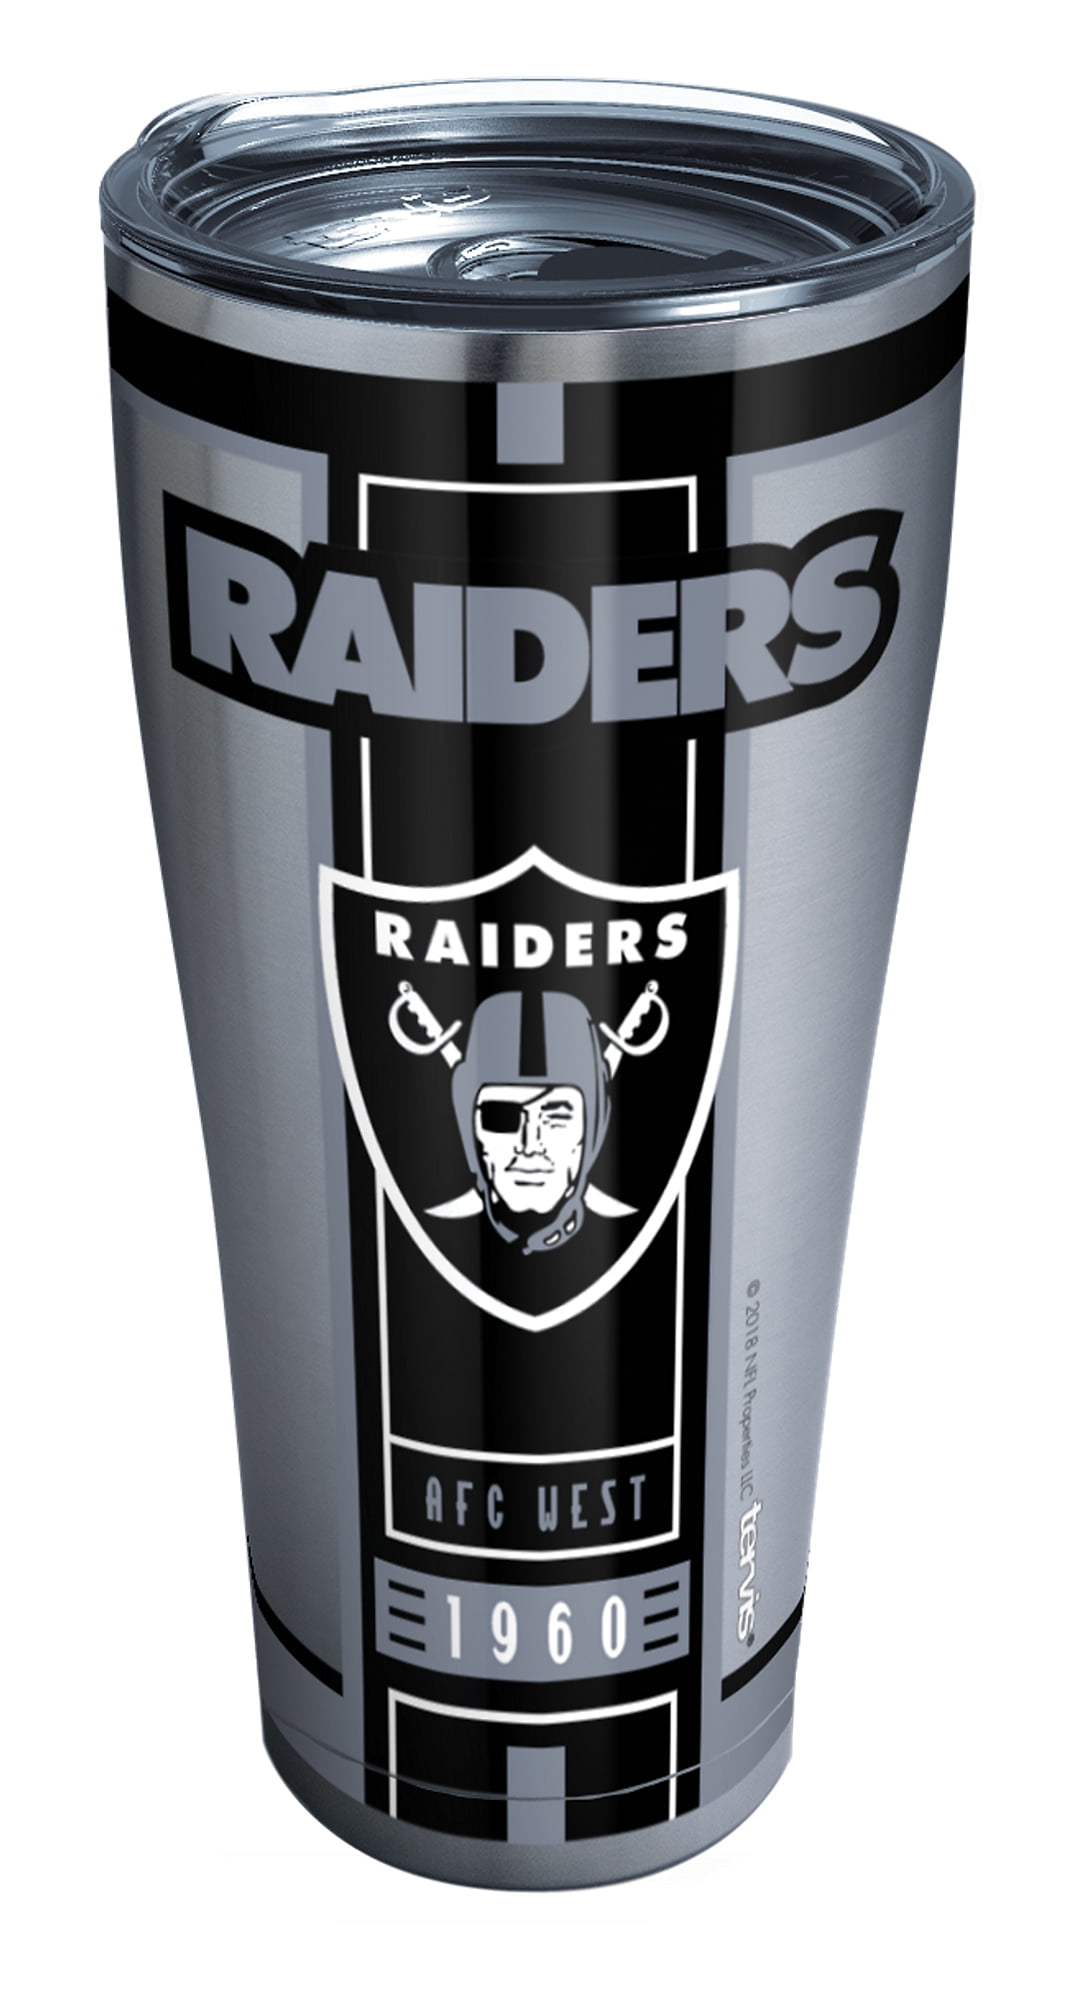 NFL Oakland Raiders Blitz 24 oz Stainless Steel Water Bottle with lid 